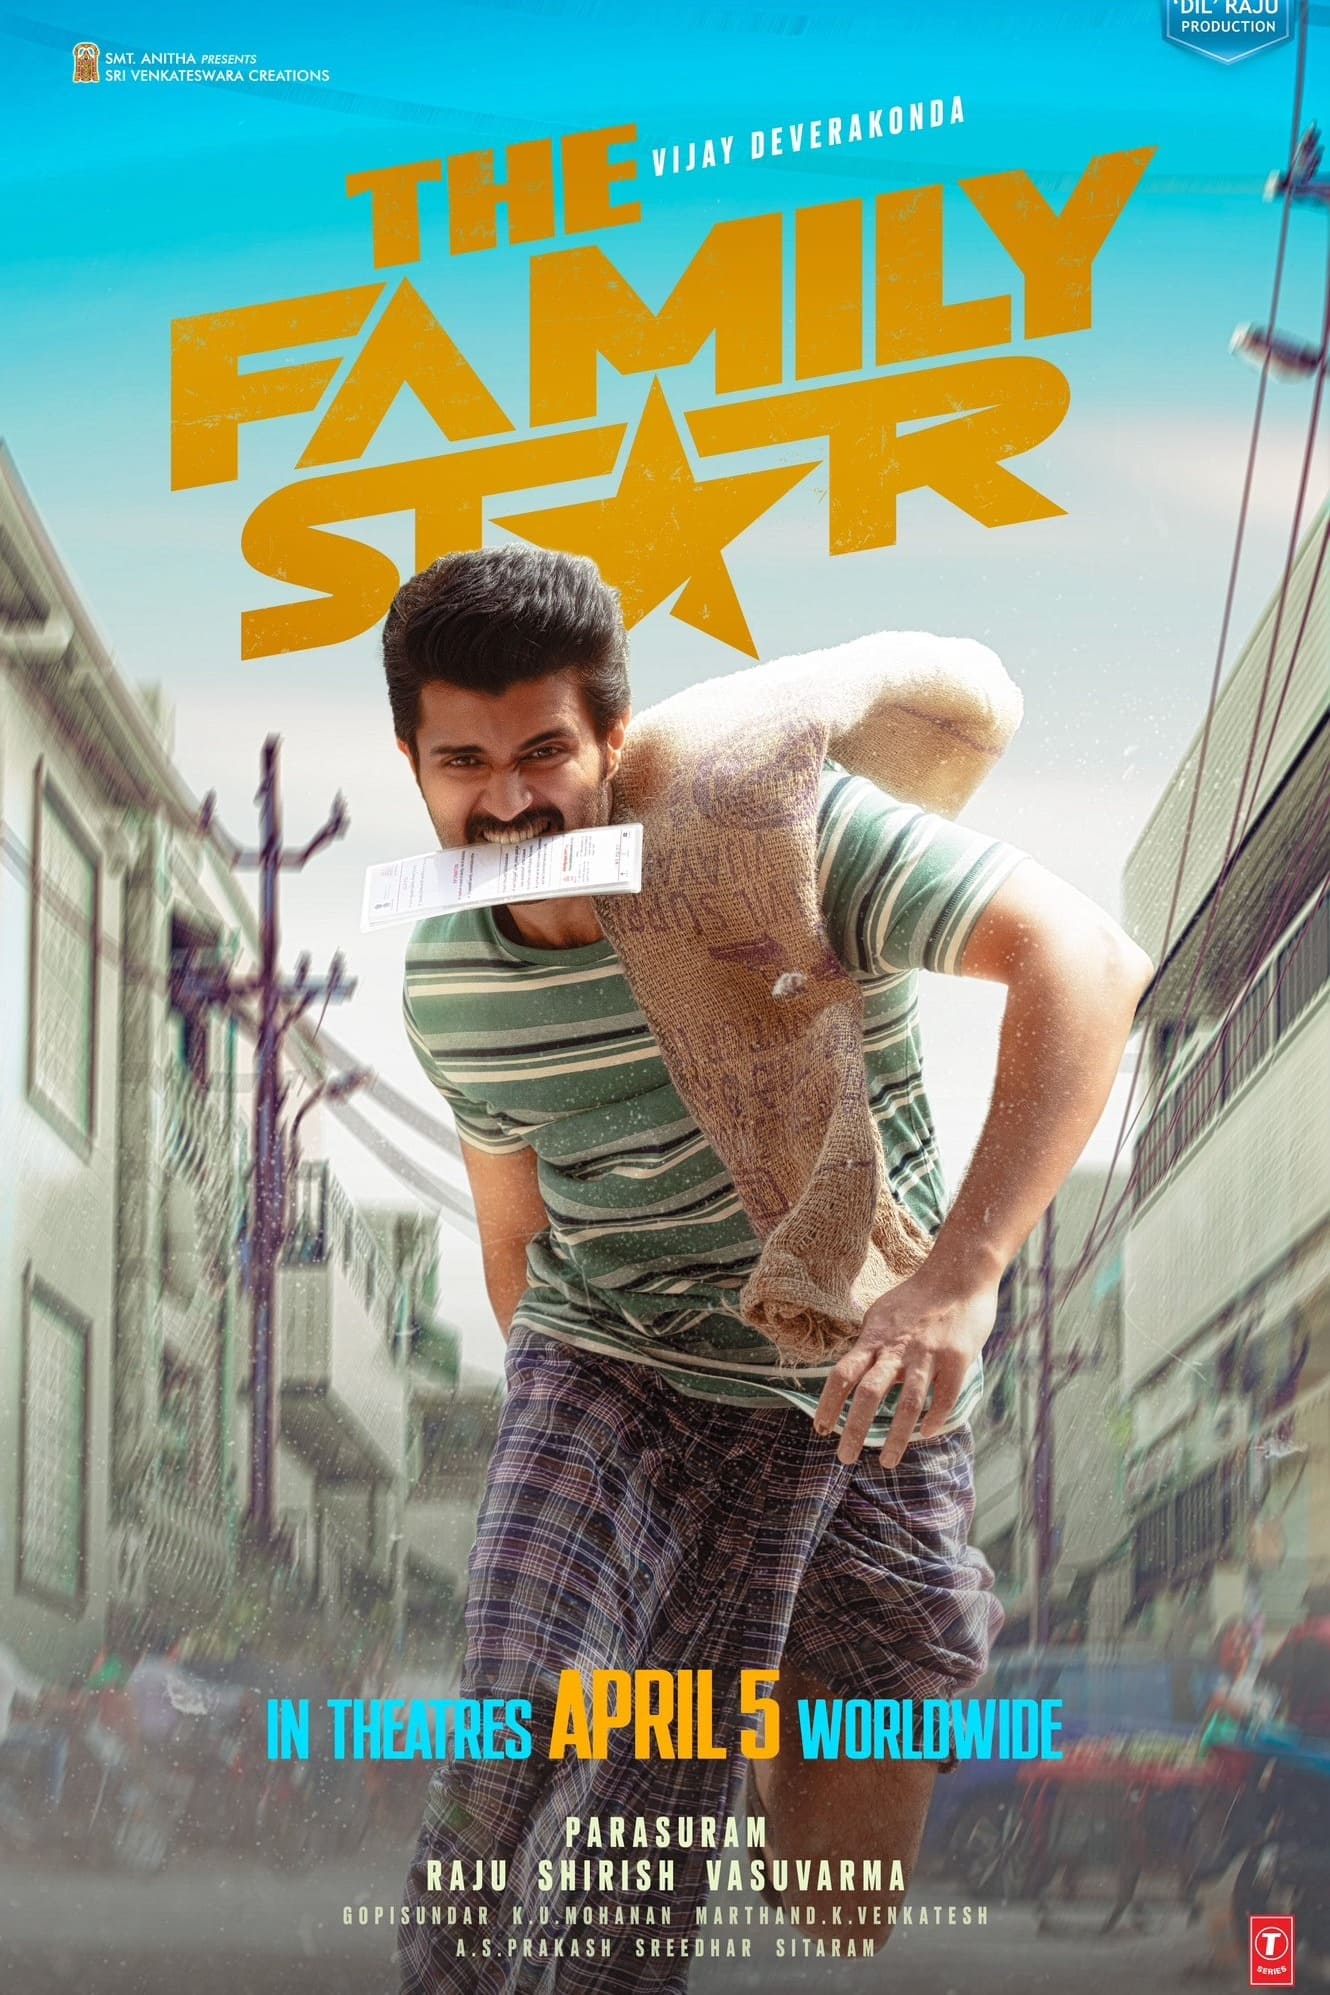 Poster for the movie "Family Star"